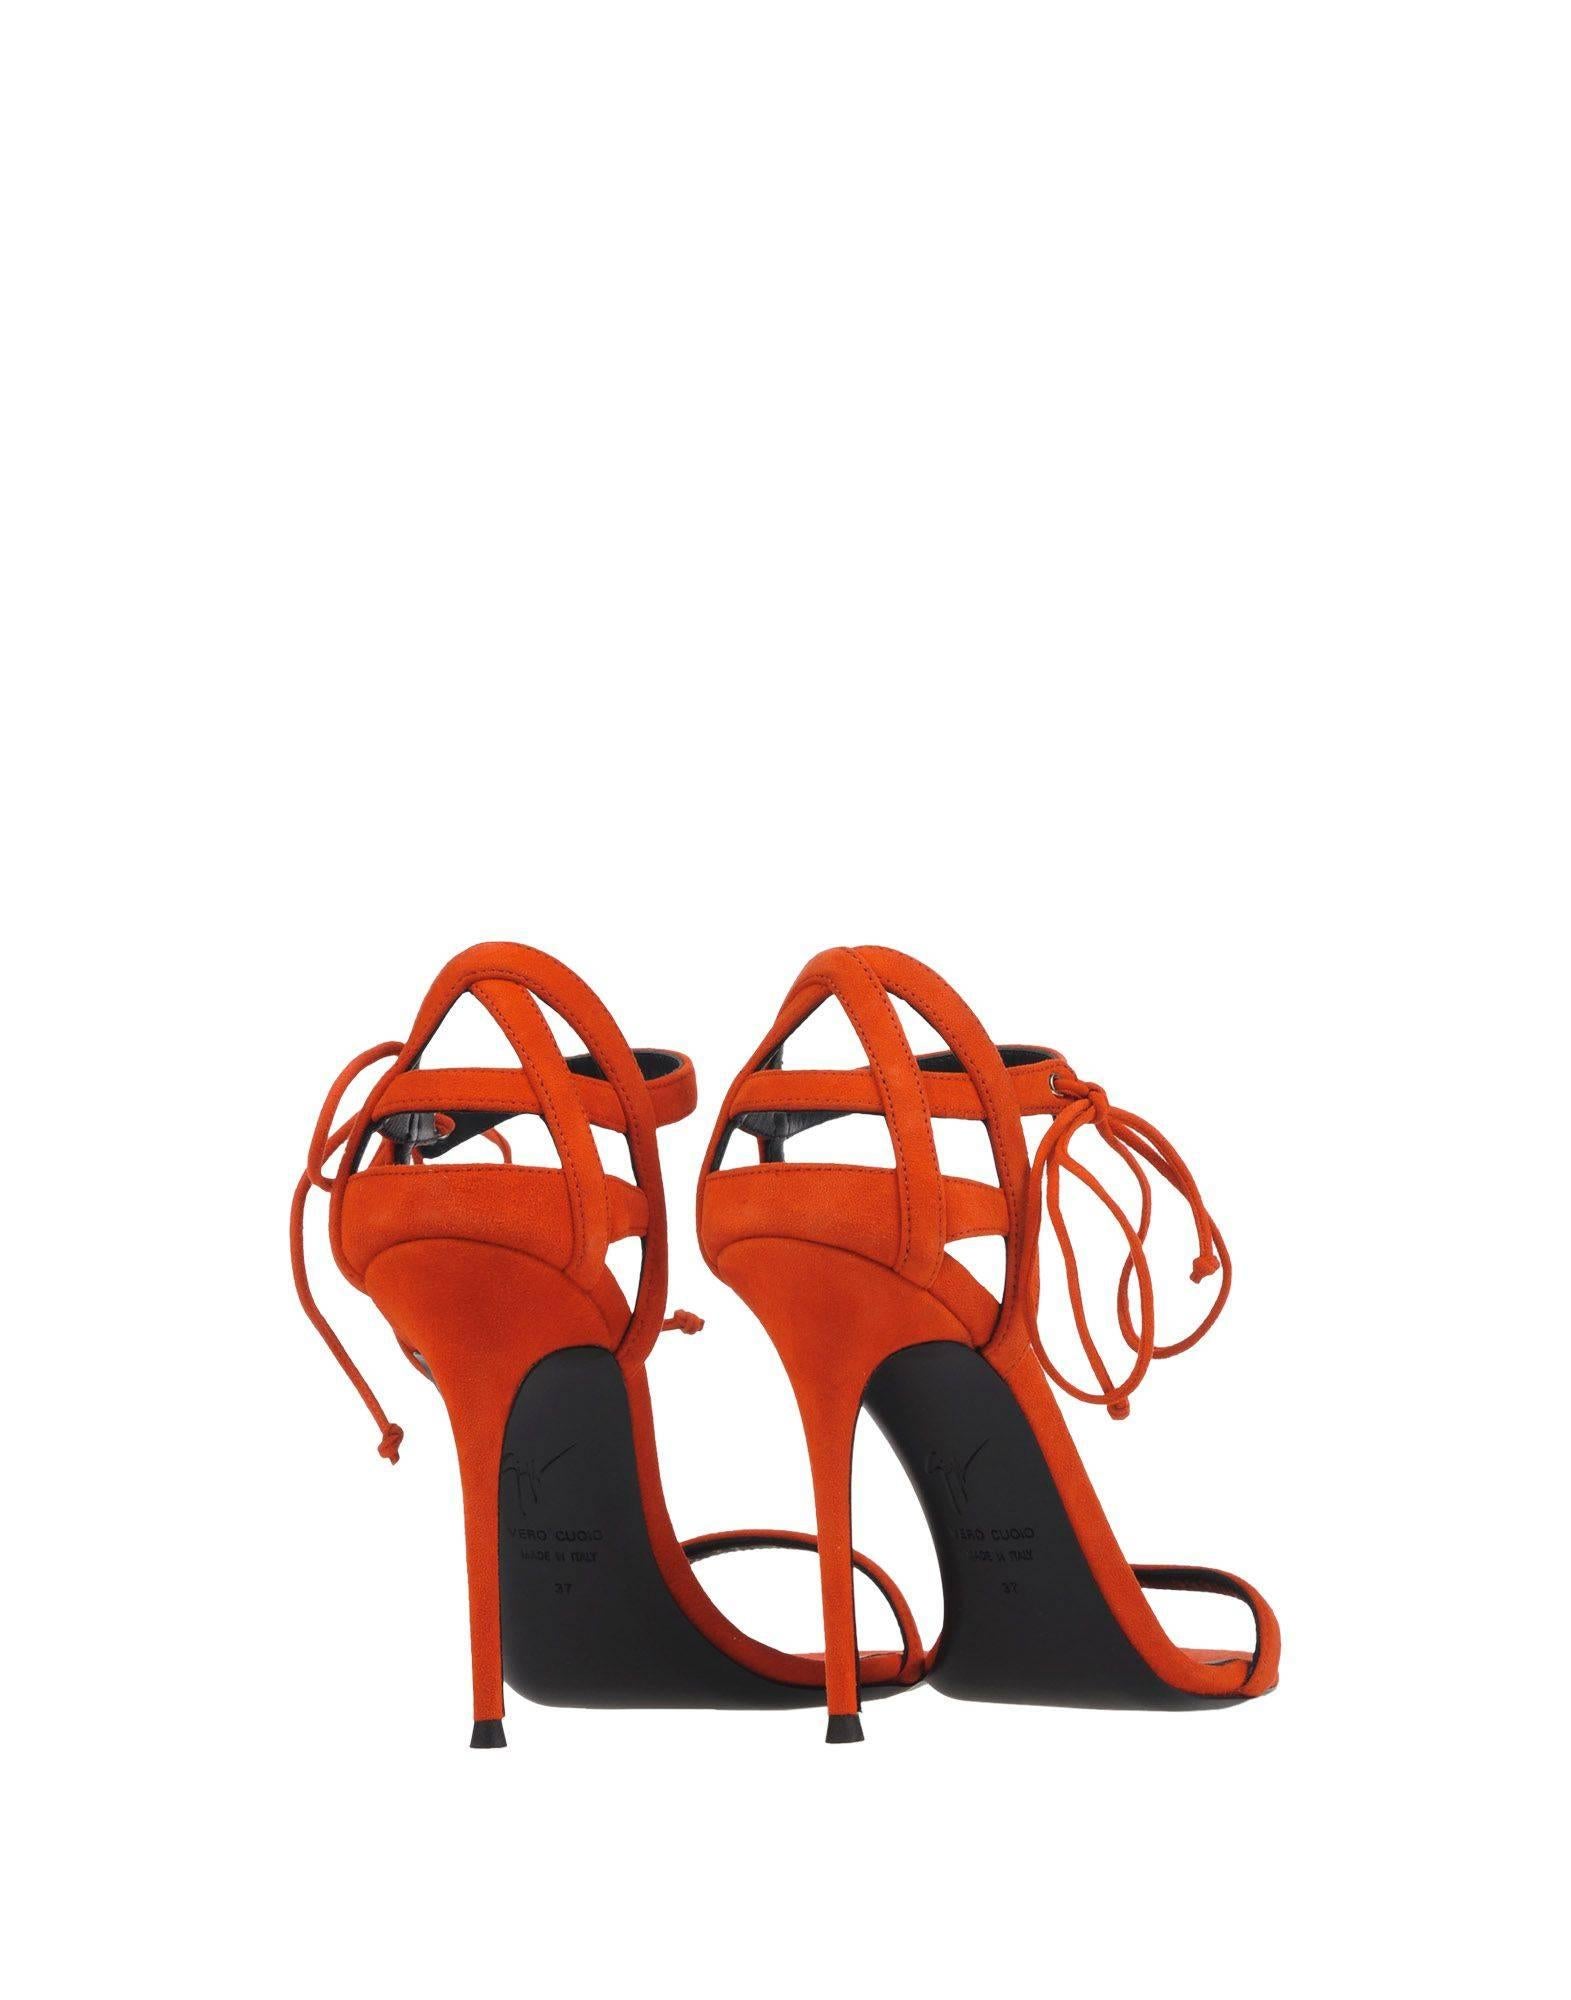 Giuseppe Zanotti New Suede Cage Cut Out Sandals Heels in Box  In New Condition In Chicago, IL